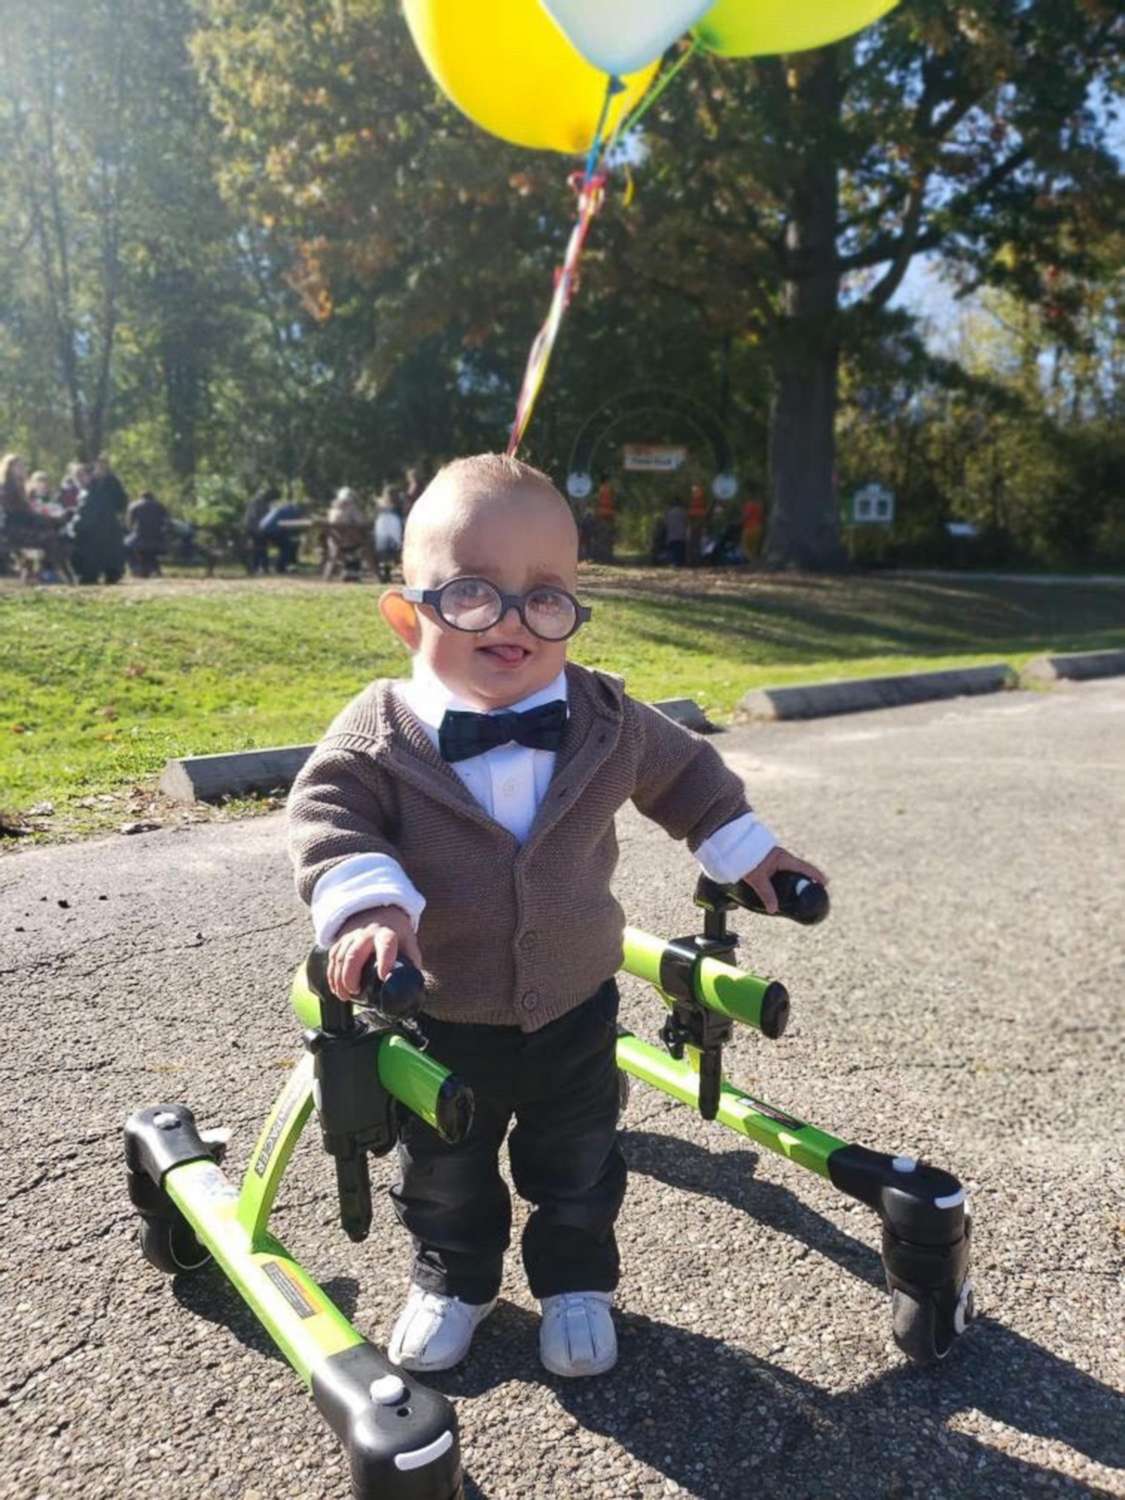 PHOTO: Brantley Morse, 2, is dressed as Carl from the Pixar film, "Up," at a fall festival in Ohio, October 2019.